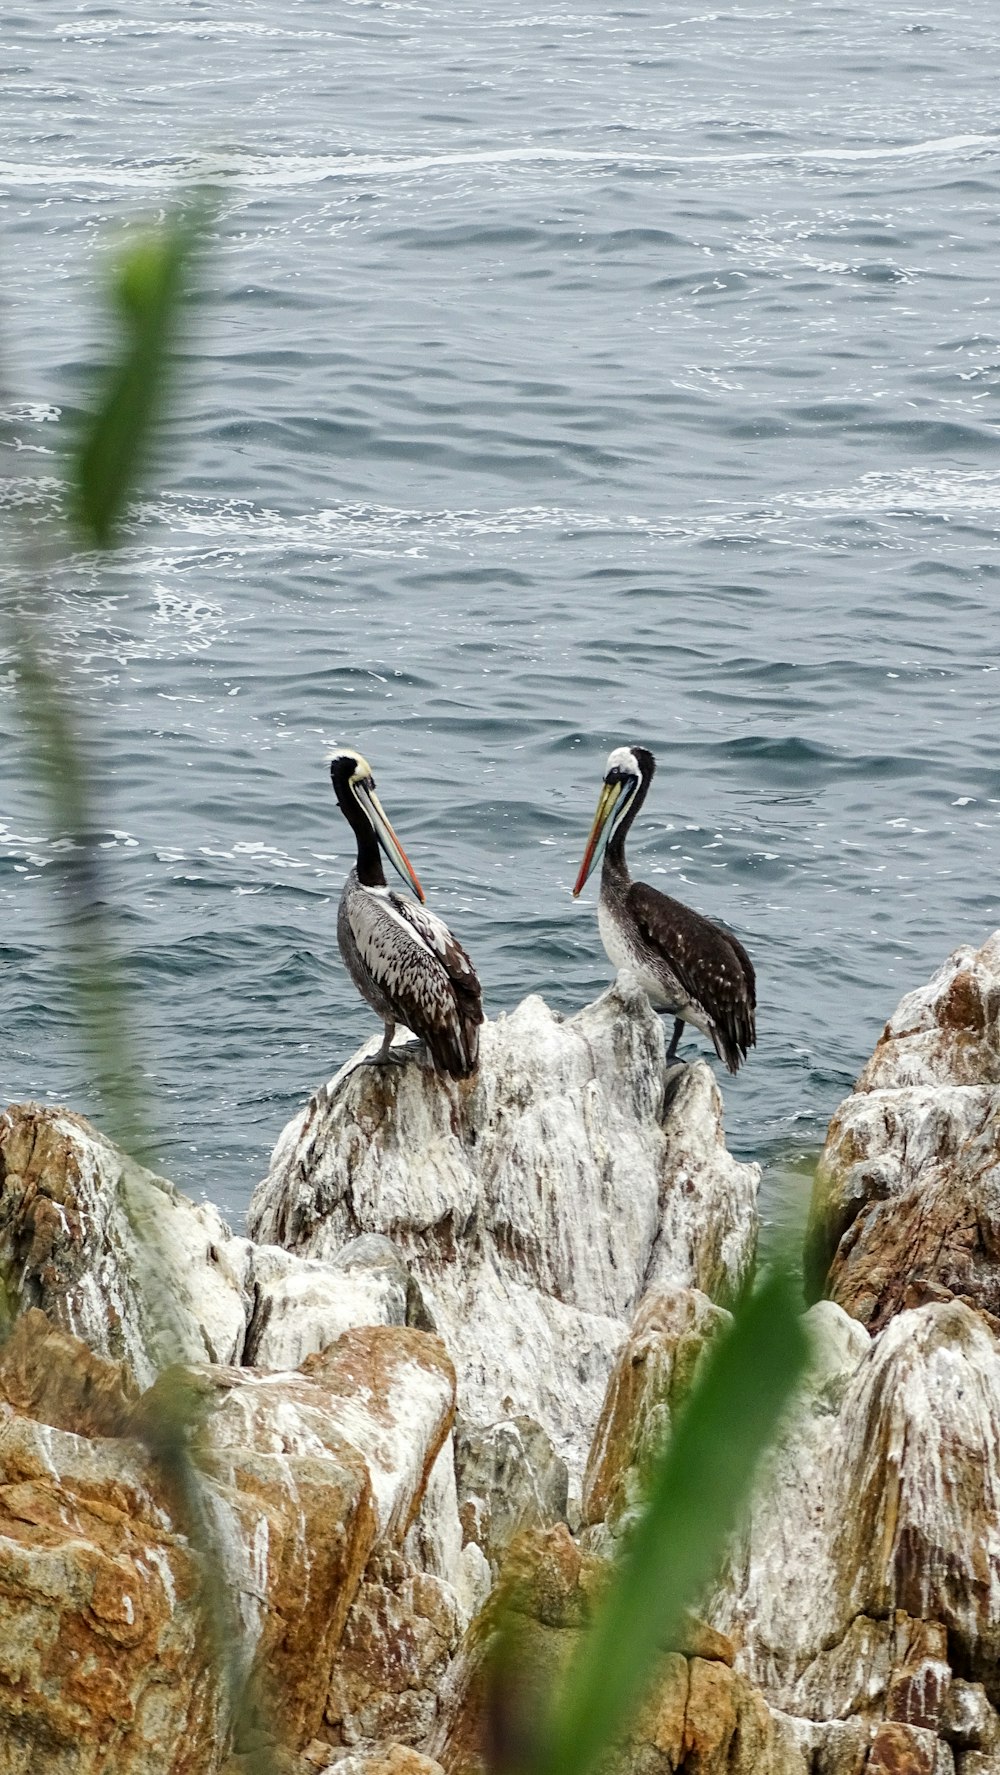 two pelicans are sitting on a rock by the water